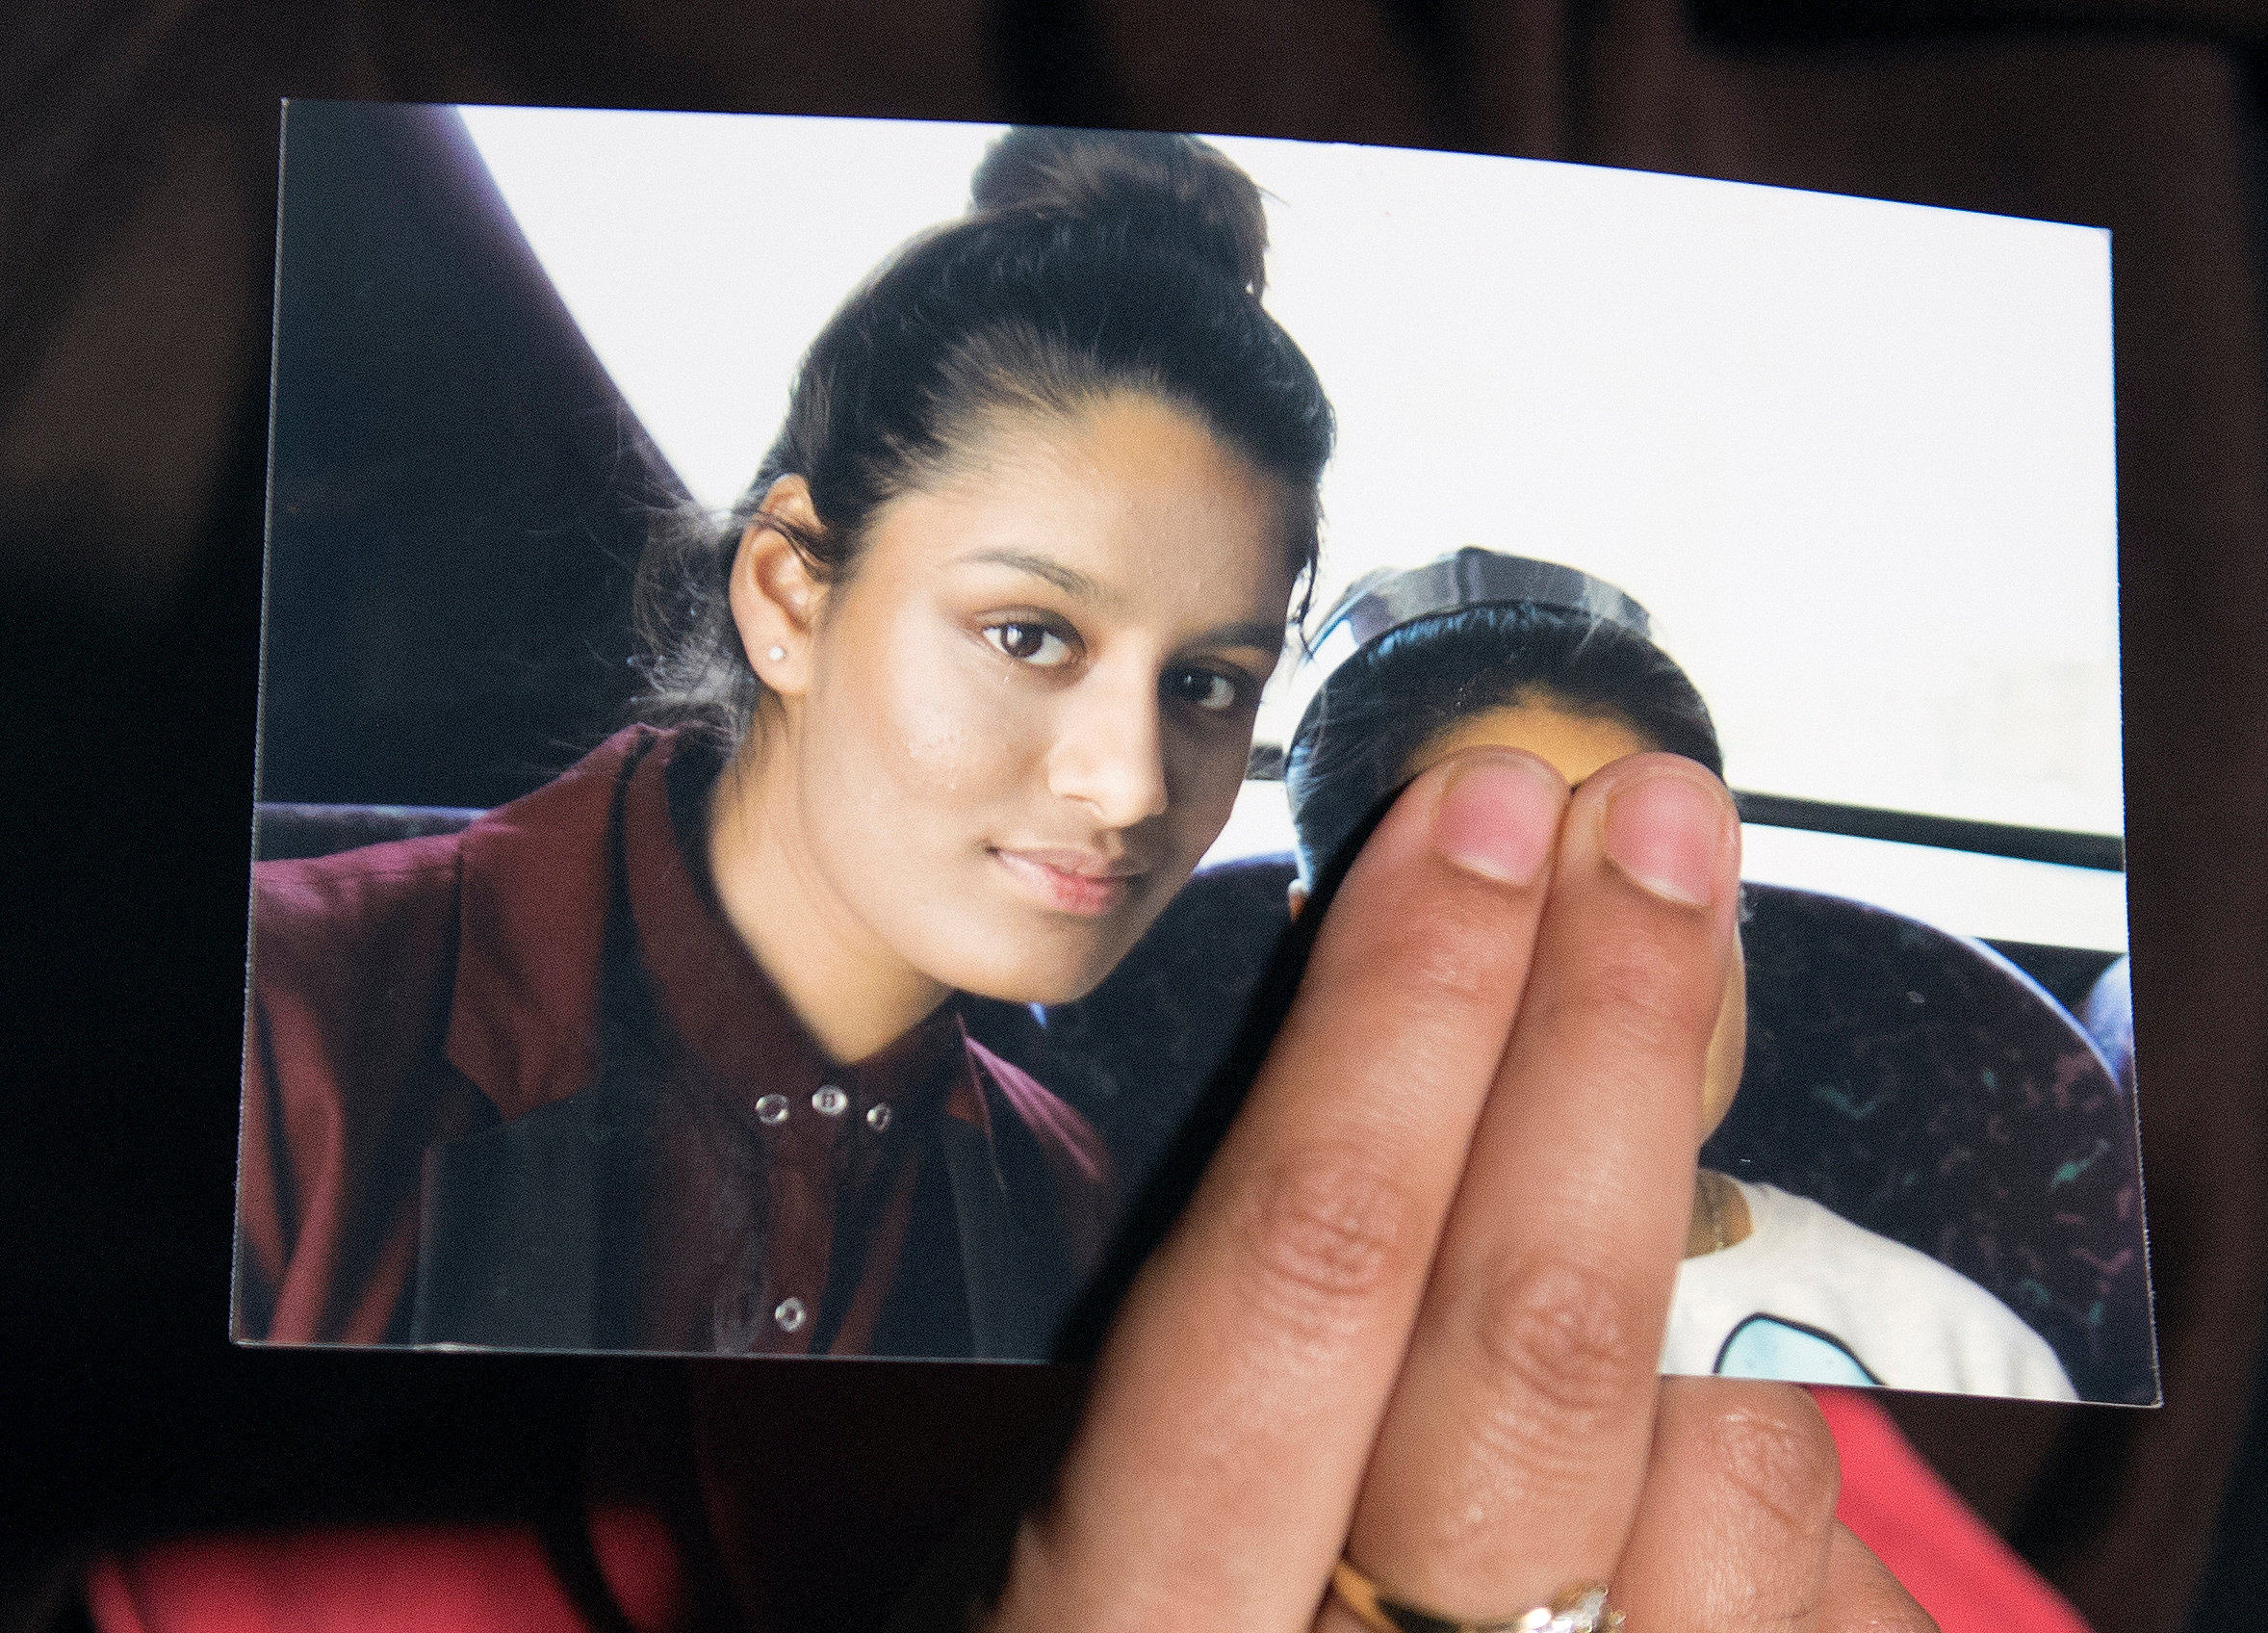 Renu Begum, sister of teenage British girl Shamima Begum, holds a photo of her sister as she makes an appeal to have her British citizenship renewed. Photo: Reuters